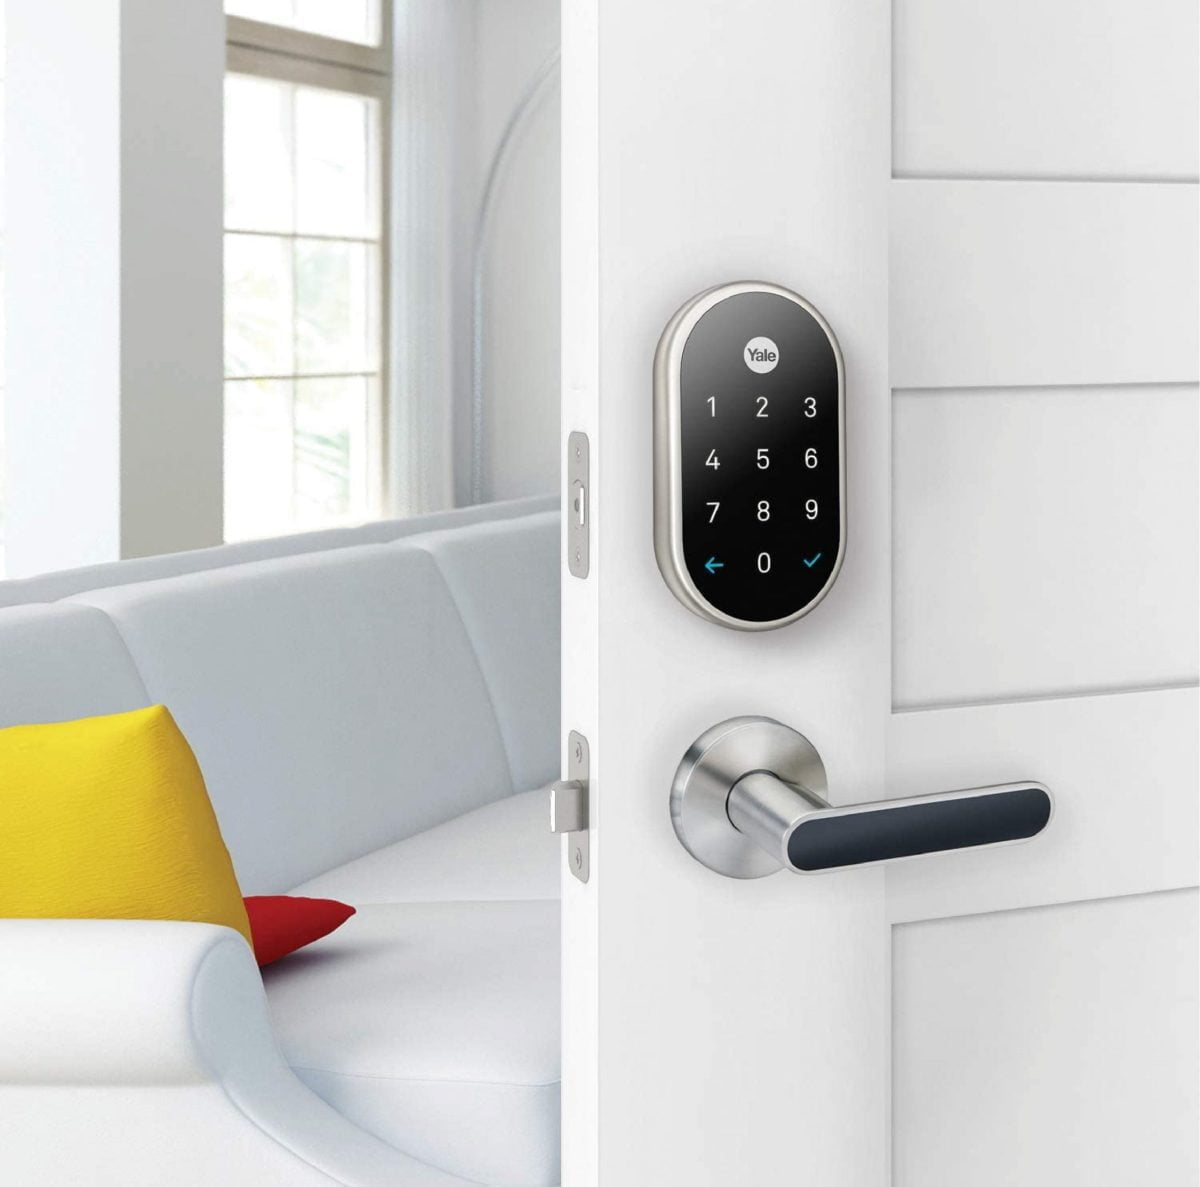 Nest Lock 04 Scaled Google &Lt;Ul Class=&Quot;A-Unordered-List A-Vertical A-Spacing-Mini&Quot;&Gt; &Lt;Li&Gt;&Lt;Span Class=&Quot;A-List-Item&Quot;&Gt;Secure And Tamper Proof: Replaces The Deadbolt You Already Have. If Someone Tries To Tamper With It, You'Ll Get An Alert. If The Batteries Start Running Low, You'Ll Know Right Away. And If Your Lock Loses Power, You Can Quickly Charge It With A 9V Battery To Unlock The Door.&Lt;/Span&Gt;&Lt;/Li&Gt; &Lt;Li&Gt;&Lt;Span Class=&Quot;A-List-Item&Quot;&Gt;Let Someone In From Anywhere: Unlock Your Door From Your Nest App. Create Passcodes For Family, Guests And People You Trust. Get Alerts Whenever Someone Unlocks And Locks The Door. And When Nest Knows You’re Away, Your Door Can Lock Automatically.&Lt;/Span&Gt;&Lt;/Li&Gt; &Lt;Li&Gt;&Lt;Span Class=&Quot;A-List-Item&Quot;&Gt;Works With Google Assistant: Check The Status Of Your Door And Lock It From Anywhere Hands‑Free With The Google Assistant. You Can Also Enter A Passcode, Use One‑Touch Locking, Or Lock It From The Nest App.&Lt;/Span&Gt;&Lt;/Li&Gt; &Lt;Li&Gt;&Lt;Span Class=&Quot;A-List-Item&Quot;&Gt;Touchscreen Keypad: No Phone? No Problem. Unlock Your Nest X Yale Lock By Entering Your Passcode On The Touchscreen Keypad. Create Passcodes For People You Trust.&Lt;/Span&Gt;&Lt;/Li&Gt; &Lt;/Ul&Gt; Https://Youtu.be/Dbdxol3Avxe Google Rb-Yrd540-Wv-619 X Yale Lock With Nest Connect Google Rb-Yrd540-Wv-619 X Yale Lock With Nest Connect, Satin Nickel